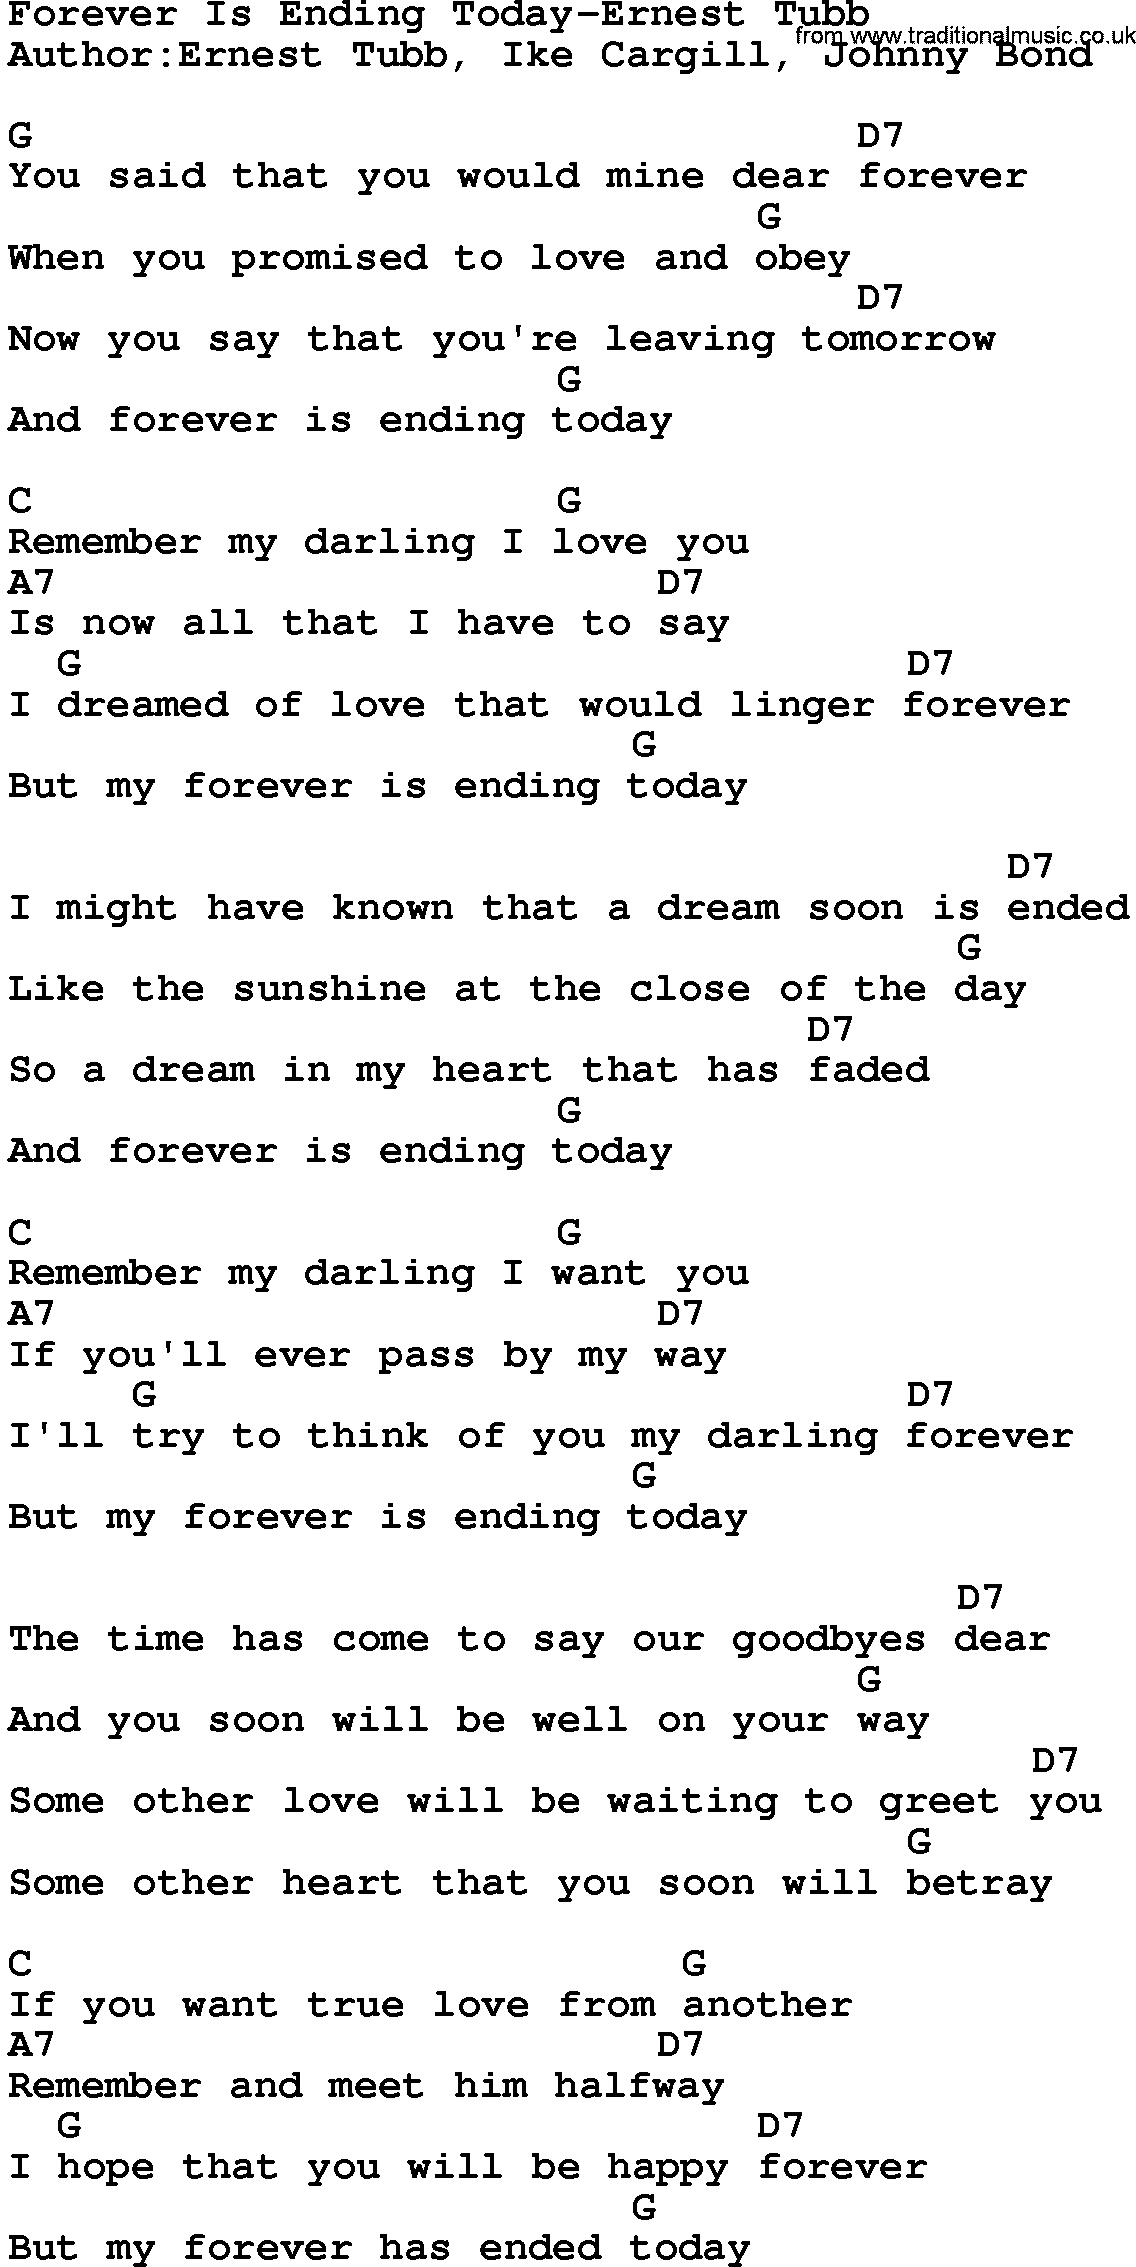 Country music song: Forever Is Ending Today-Ernest Tubb lyrics and chords